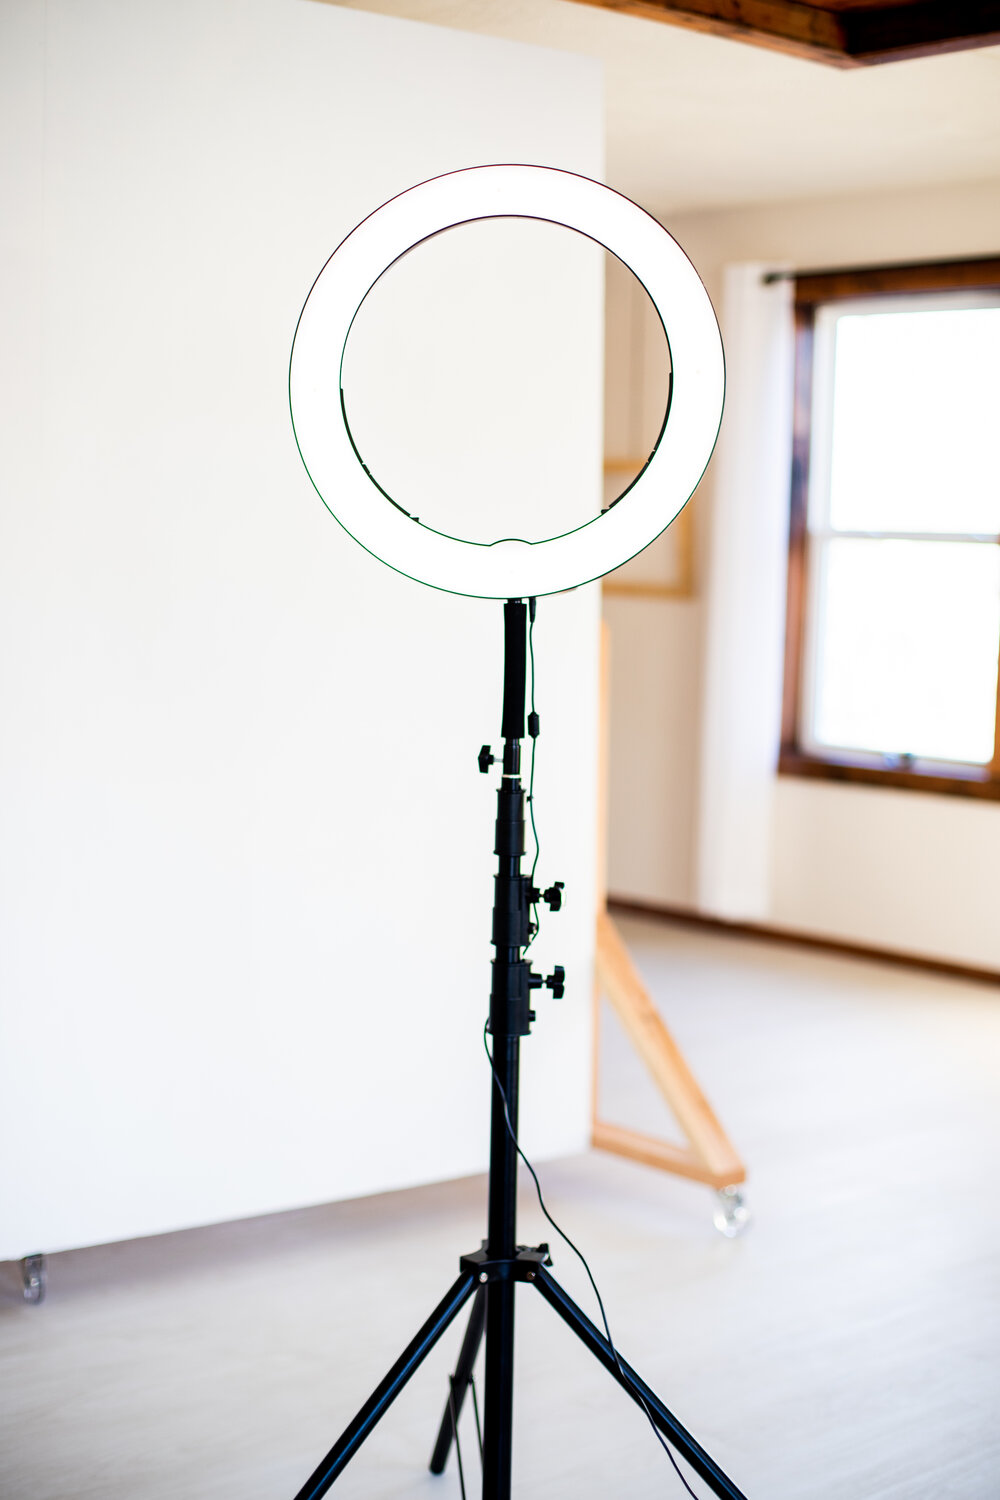 How To Use A Ring Light How To Use the Ring Light for Your Rental! — LIGHTBOX